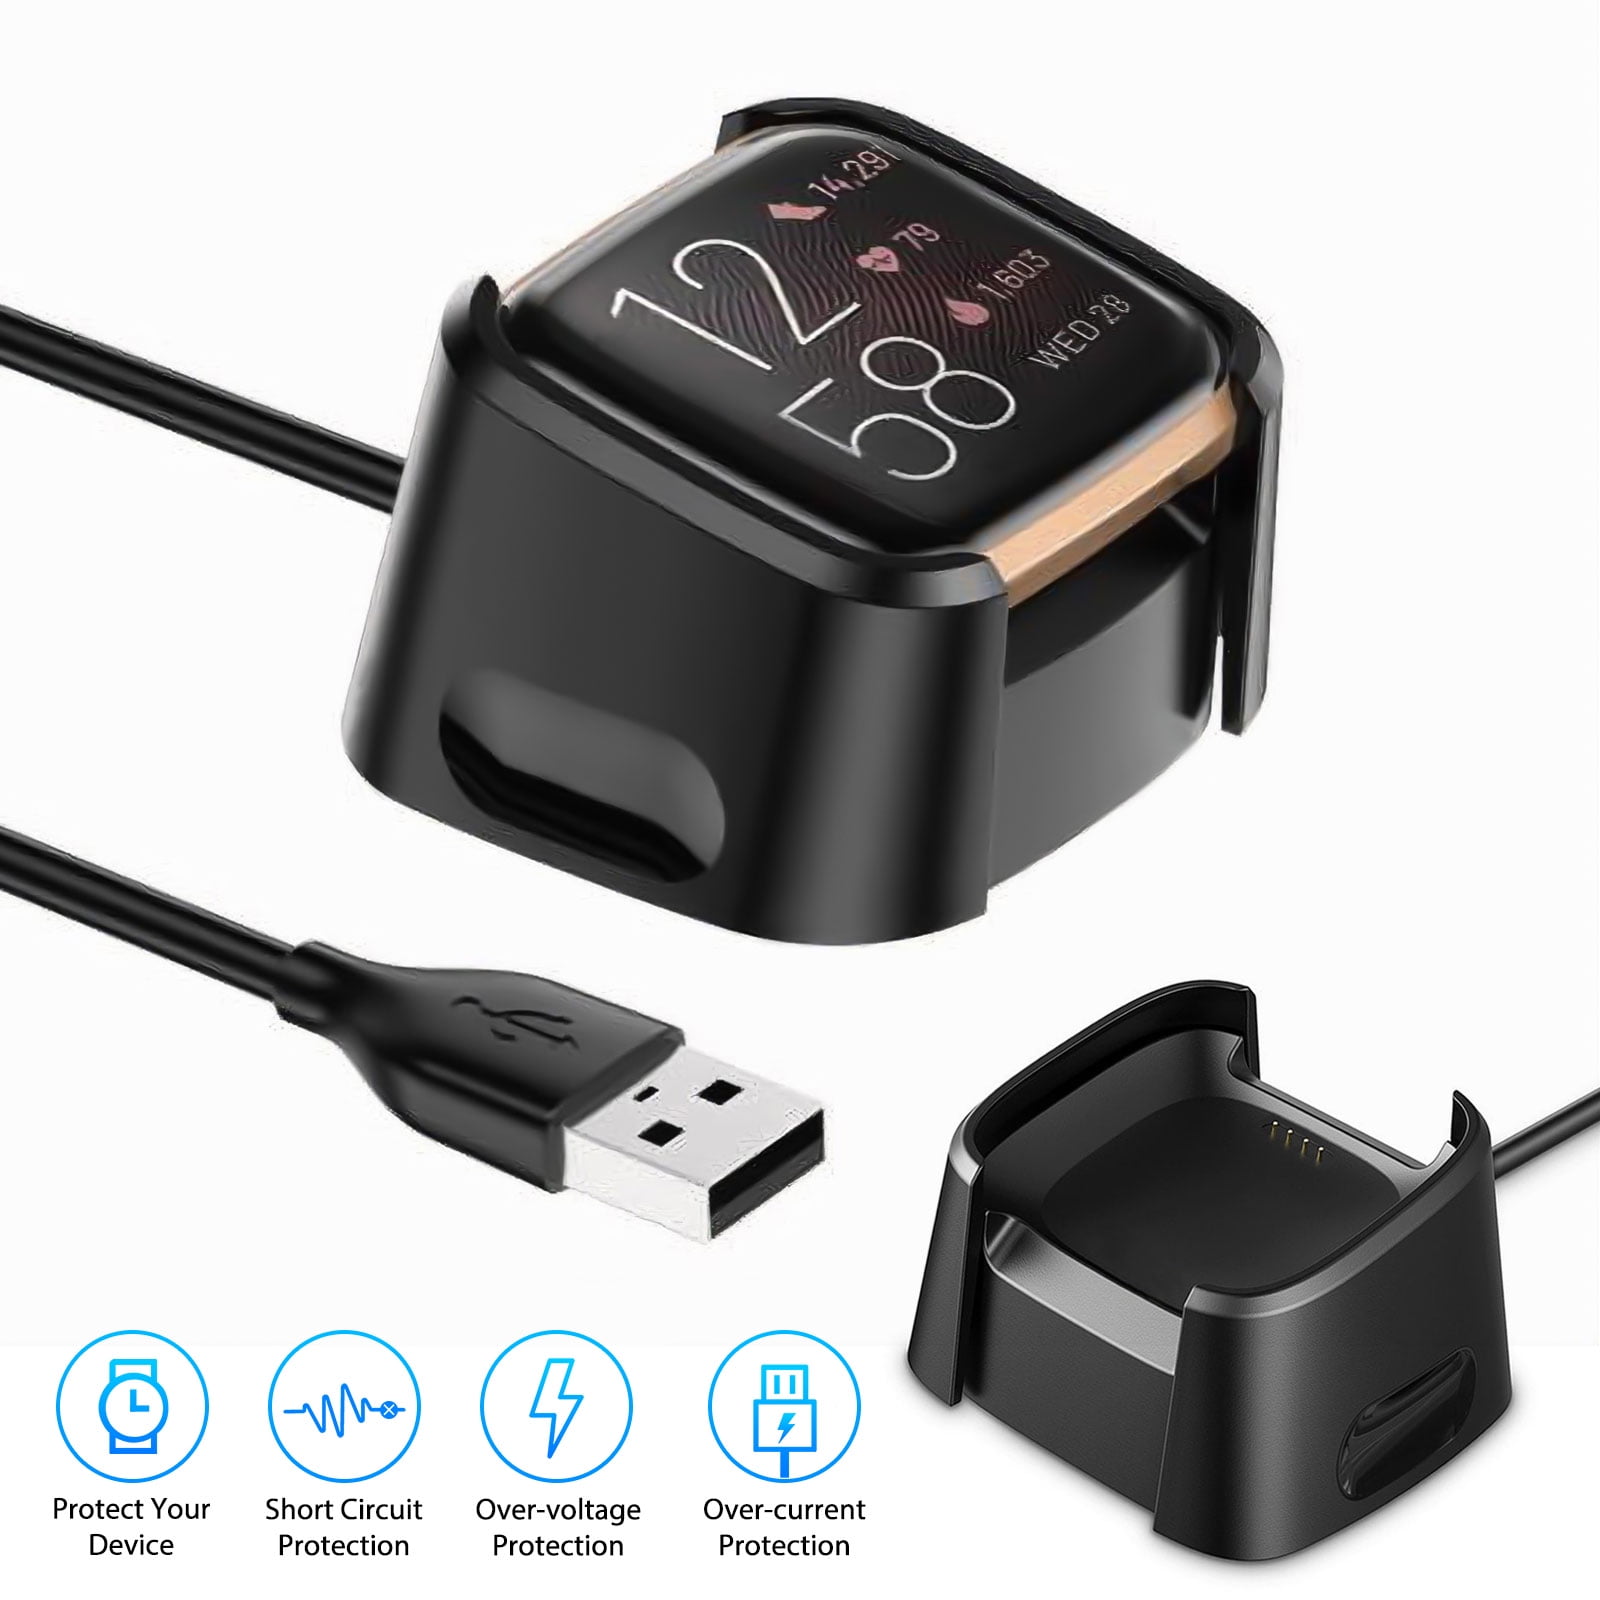 fitbit versa 2 wall charger